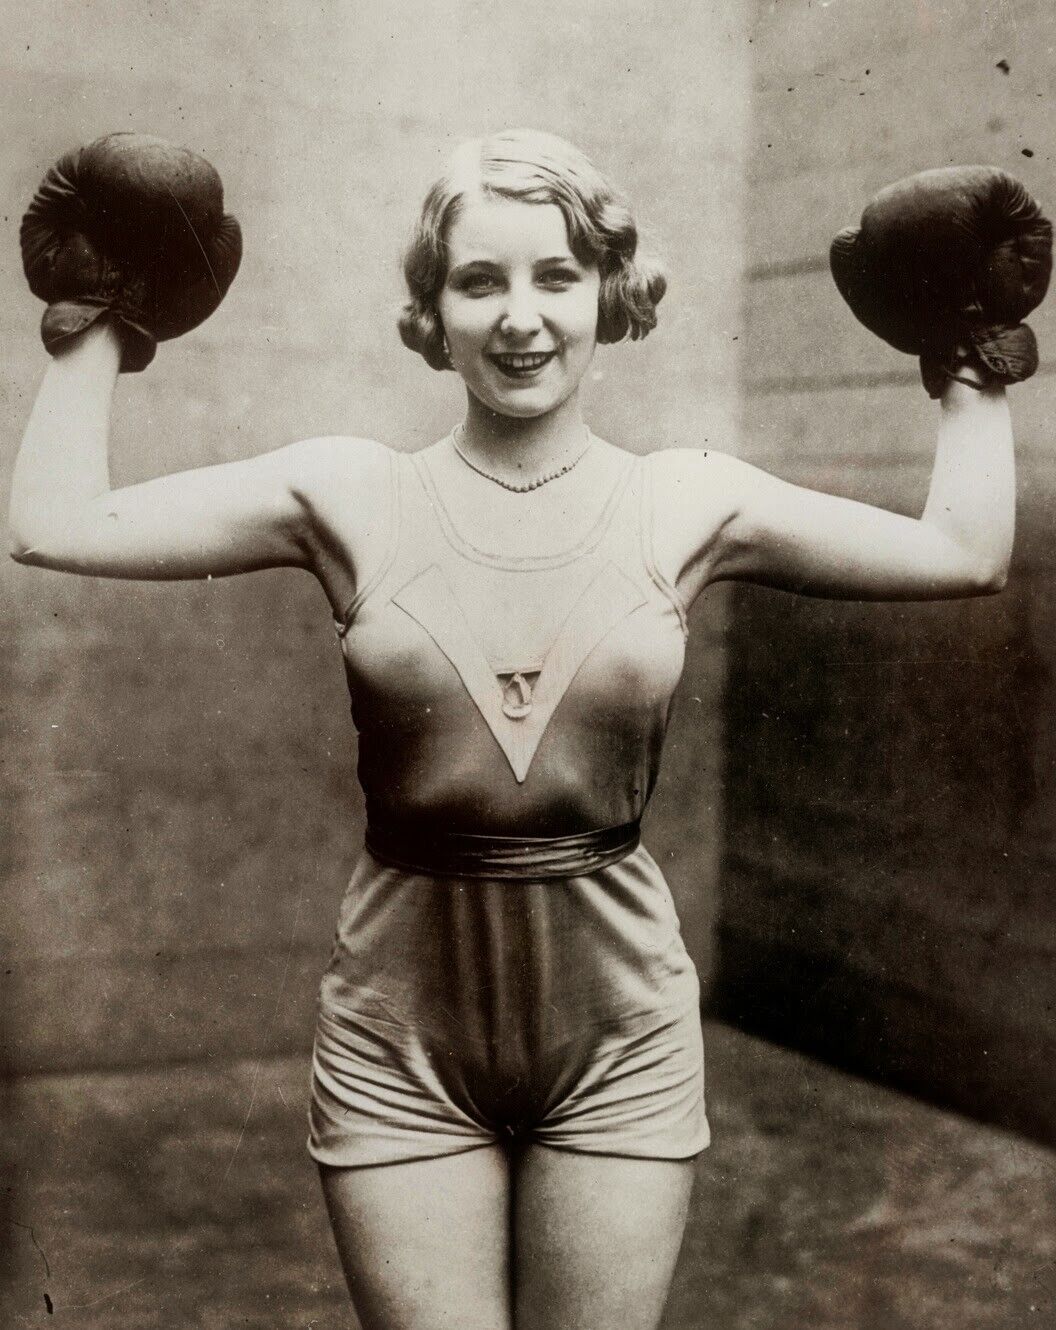 Women boxer in The Old Workout Gear Vintage photo  8X10